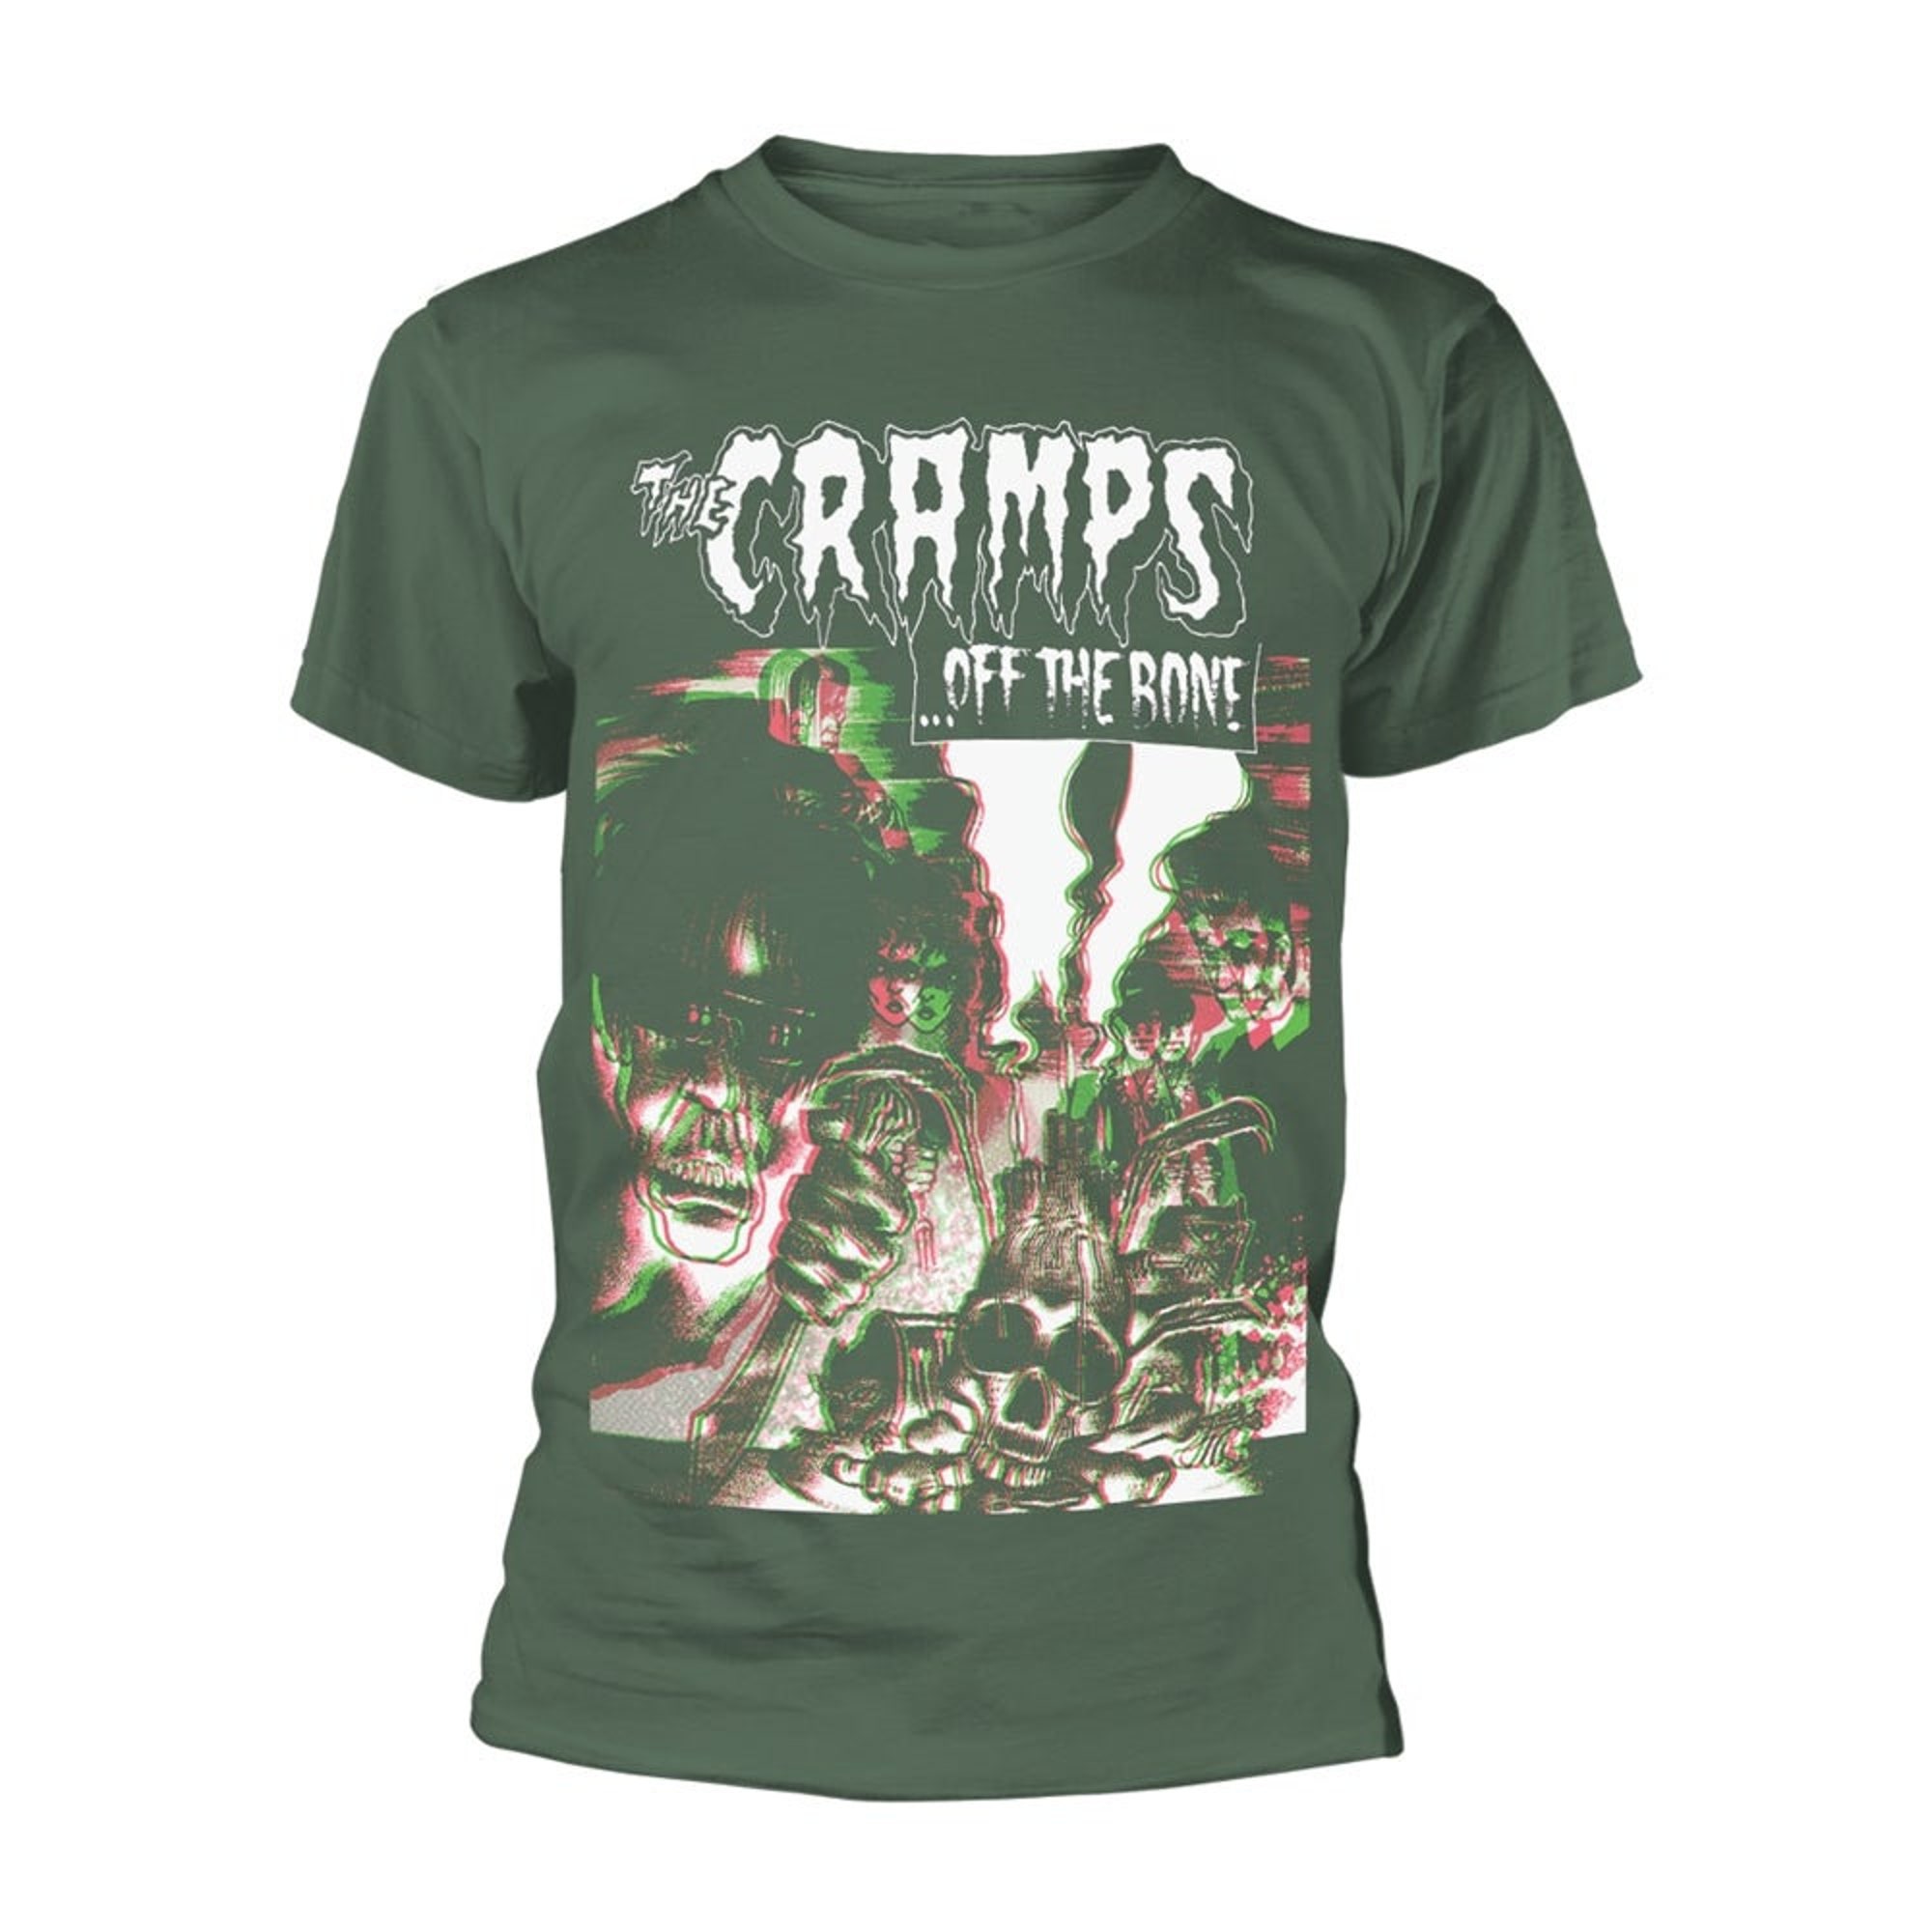 The Cramps Unisex T-shirt: Off The Bone (Green)